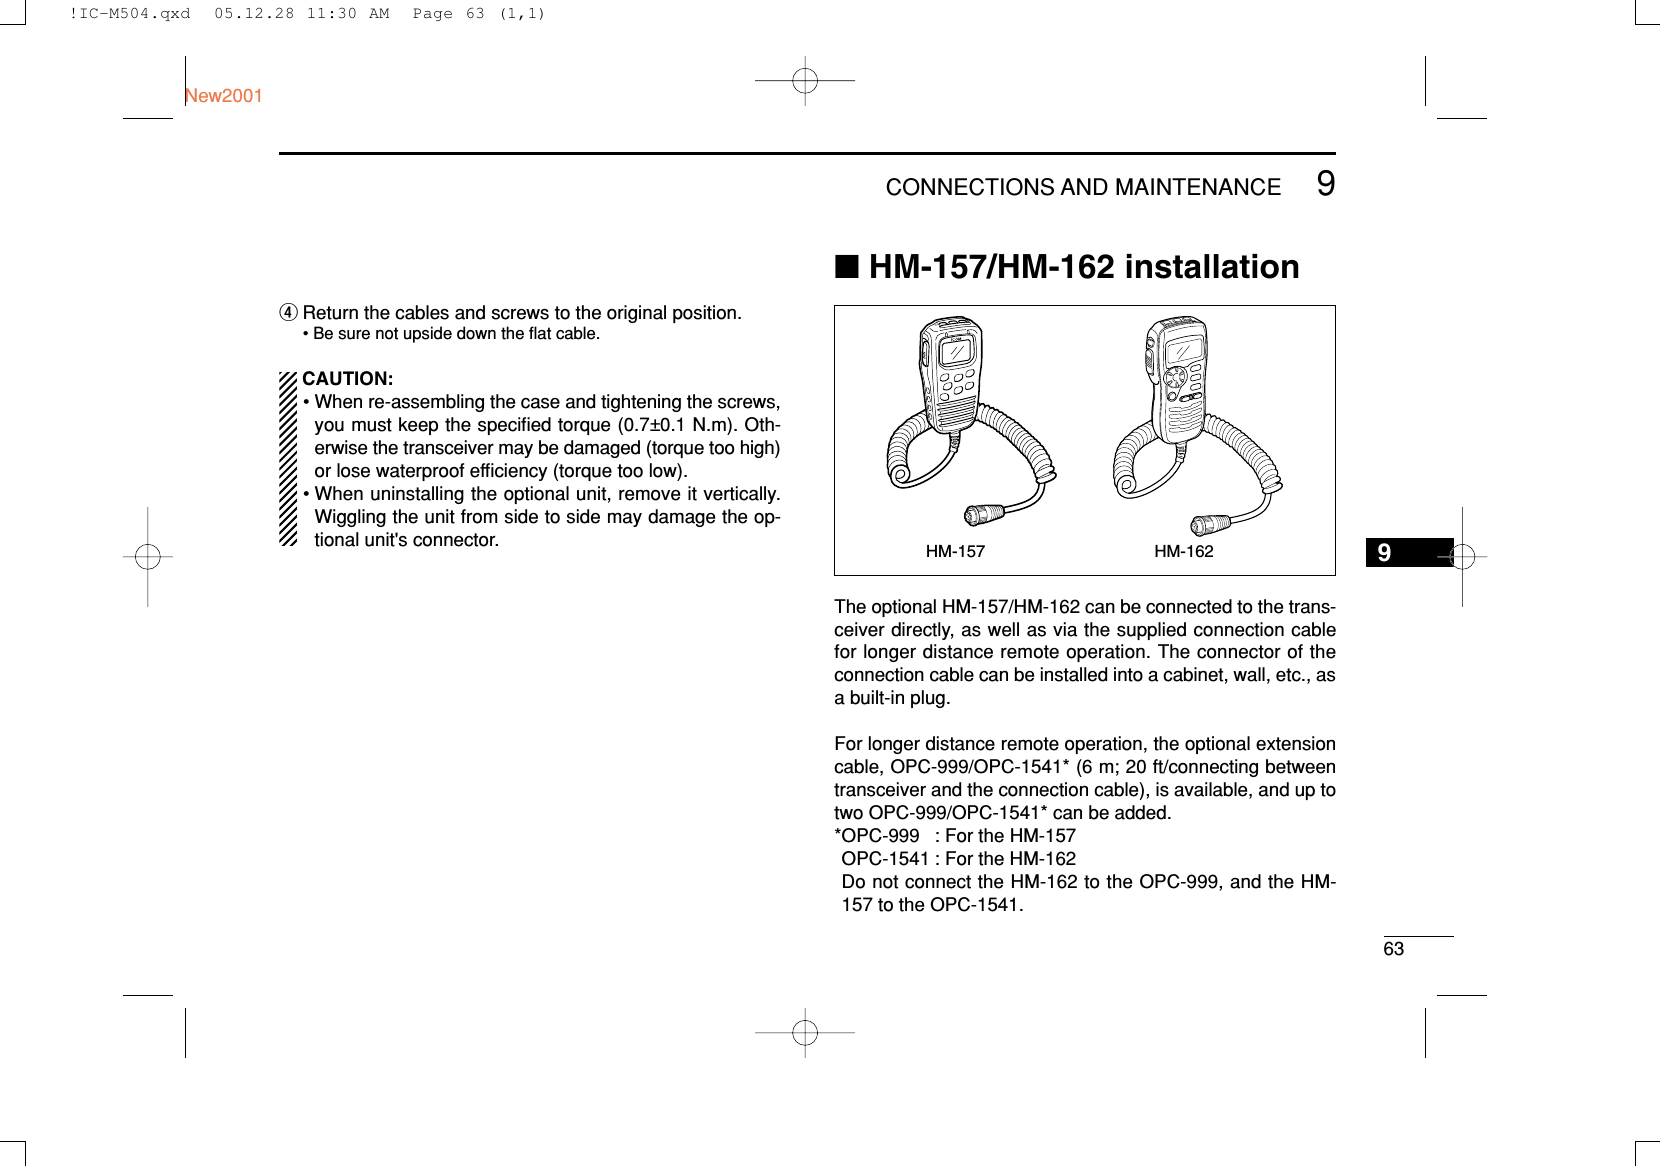 639CONNECTIONS AND MAINTENANCENew20019rReturn the cables and screws to the original position.• Be sure not upside down the ﬂat cable.CAUTION:• When re-assembling the case and tightening the screws,you must keep the speciﬁed torque (0.7±0.1 N.m). Oth-erwise the transceiver may be damaged (torque too high)or lose waterproof efﬁciency (torque too low).• When uninstalling the optional unit, remove it vertically.Wiggling the unit from side to side may damage the op-tional unit&apos;s connector.■HM-157/HM-162 installationThe optional HM-157/HM-162 can be connected to the trans-ceiver directly, as well as via the supplied connection cablefor longer distance remote operation. The connector of theconnection cable can be installed into a cabinet, wall, etc., asa built-in plug.For longer distance remote operation, the optional extensioncable, OPC-999/OPC-1541* (6 m; 20 ft/connecting betweentransceiver and the connection cable), is available, and up totwo OPC-999/OPC-1541* can be added.*OPC-999 : For the HM-157OPC-1541 : For the HM-162Do not connect the HM-162 to the OPC-999, and the HM-157 to the OPC-1541.HM-157 HM-162!IC-M504.qxd  05.12.28 11:30 AM  Page 63 (1,1)